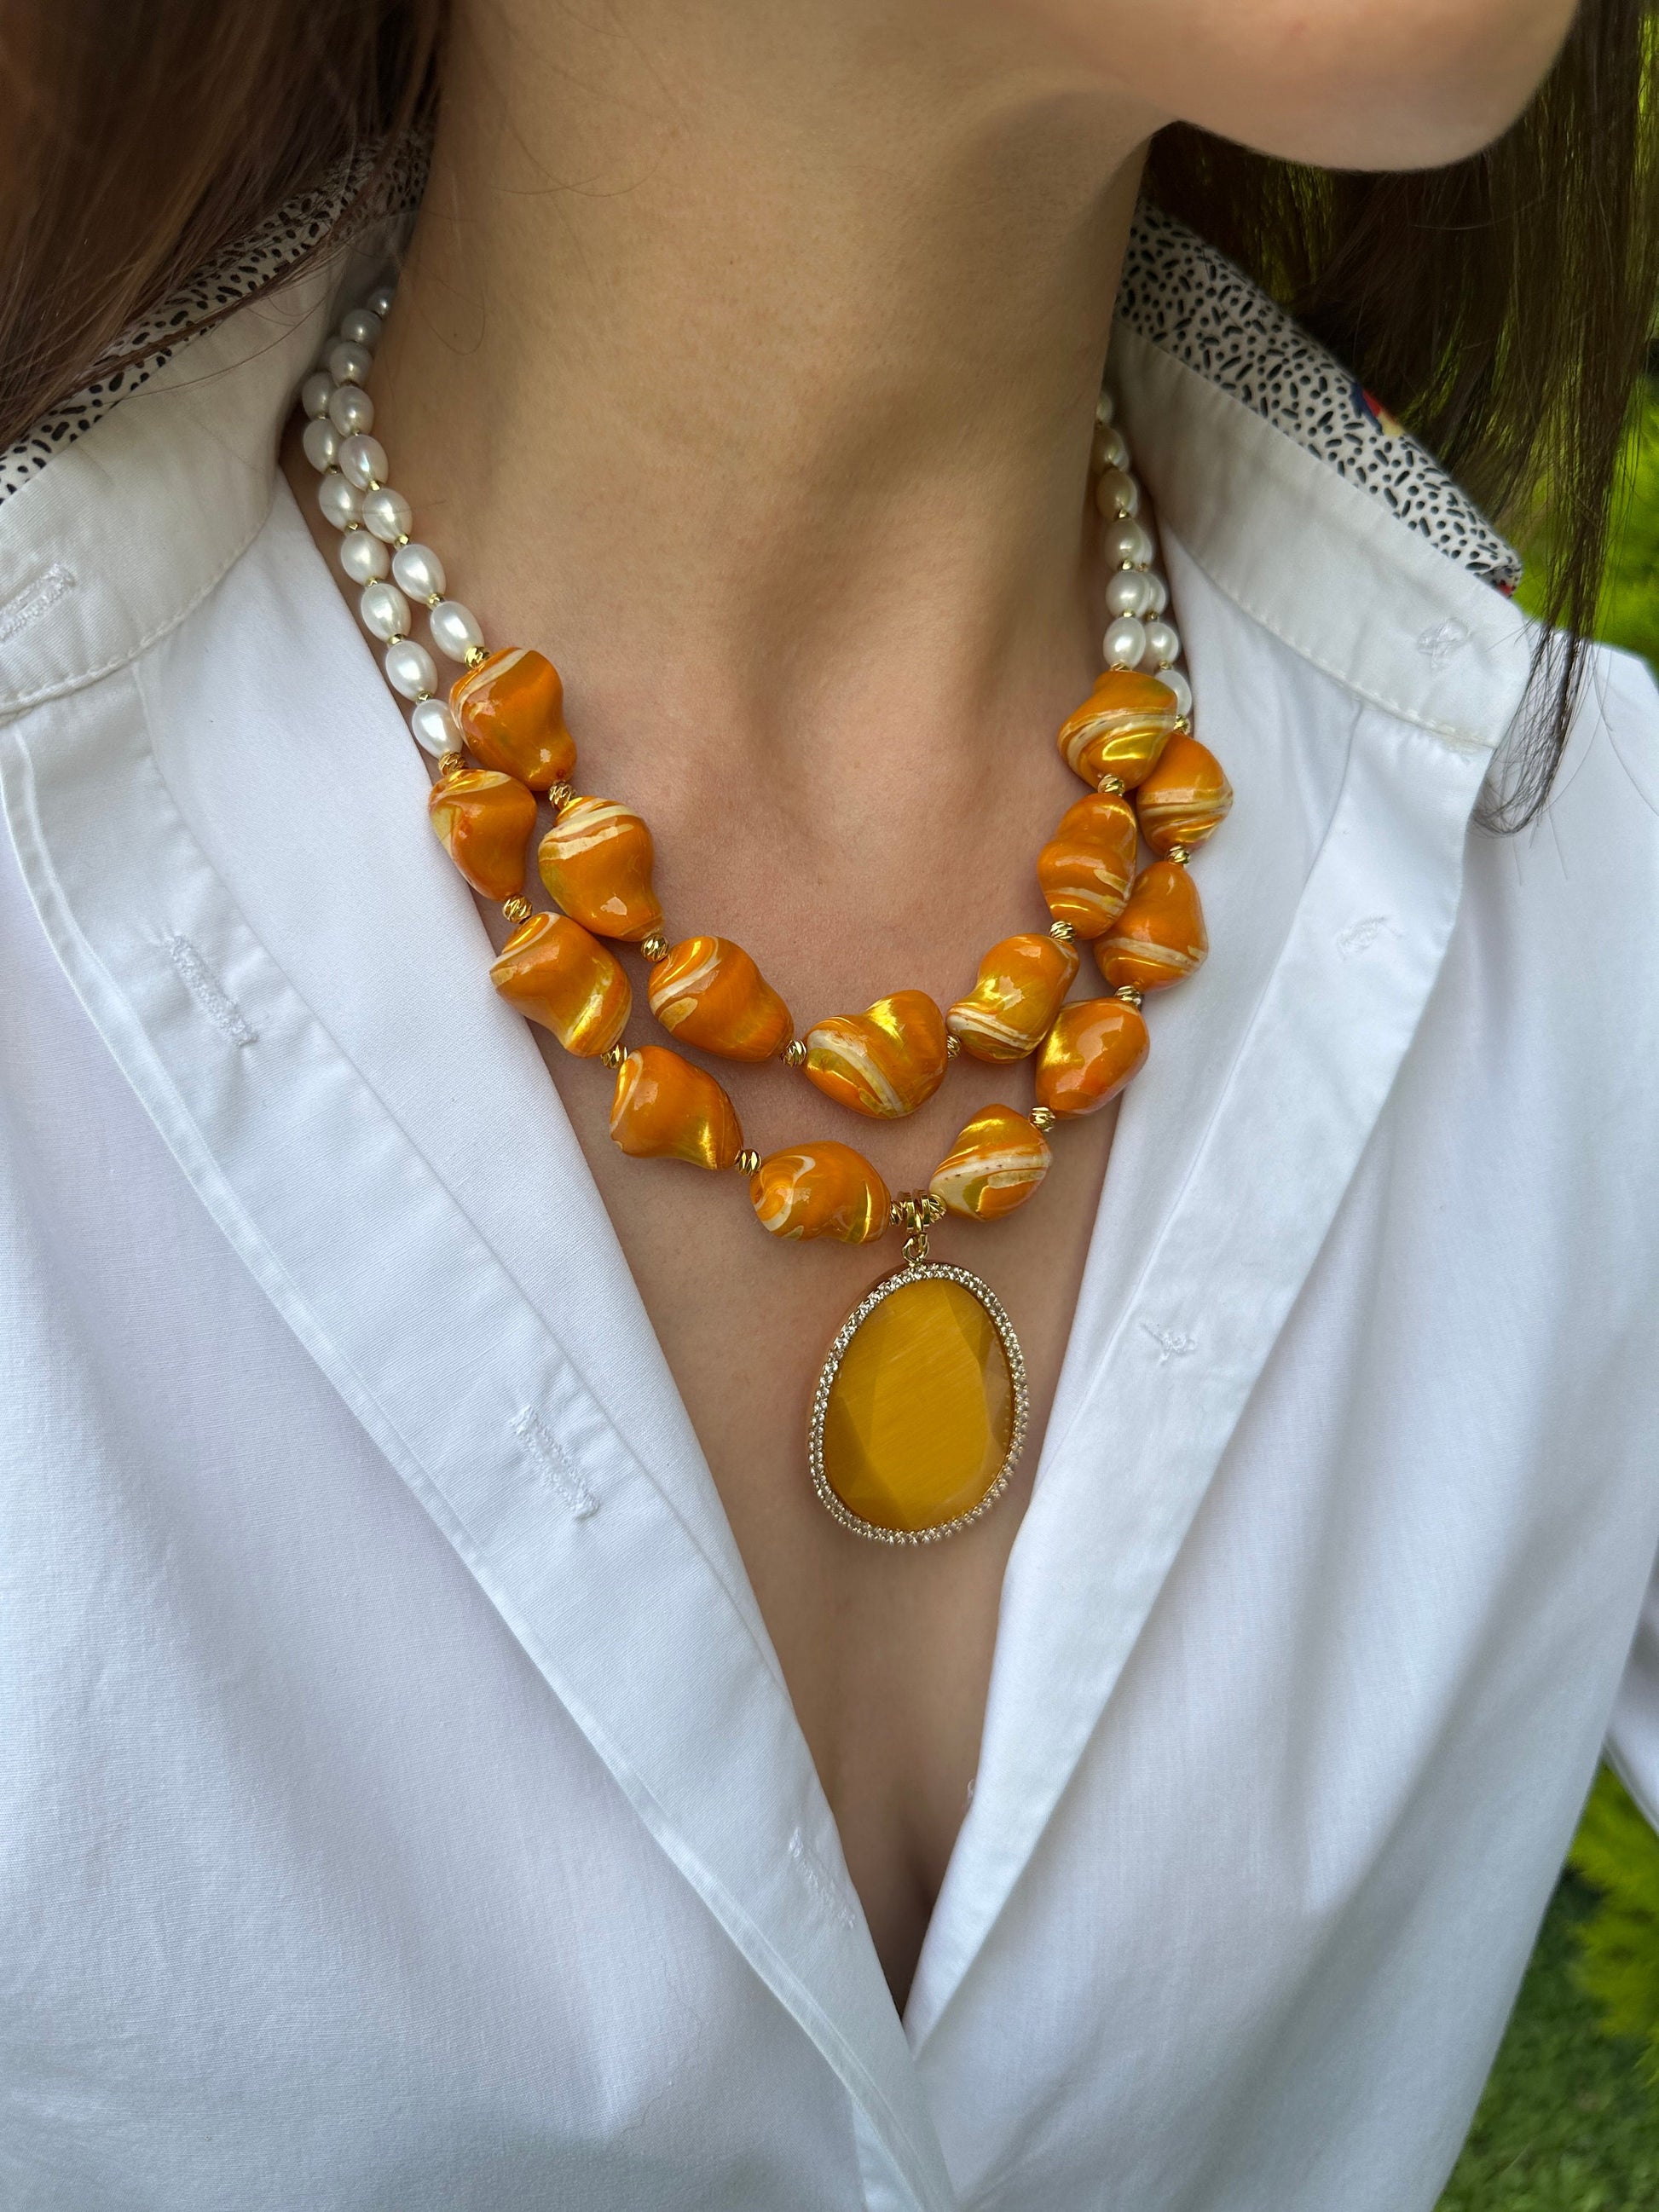 Pearl Necklace, Hot Yellow Shell Necklace, Beaded Handmade Jewelry, Statement Necklace for Birthday Gift, Summer Jewelry